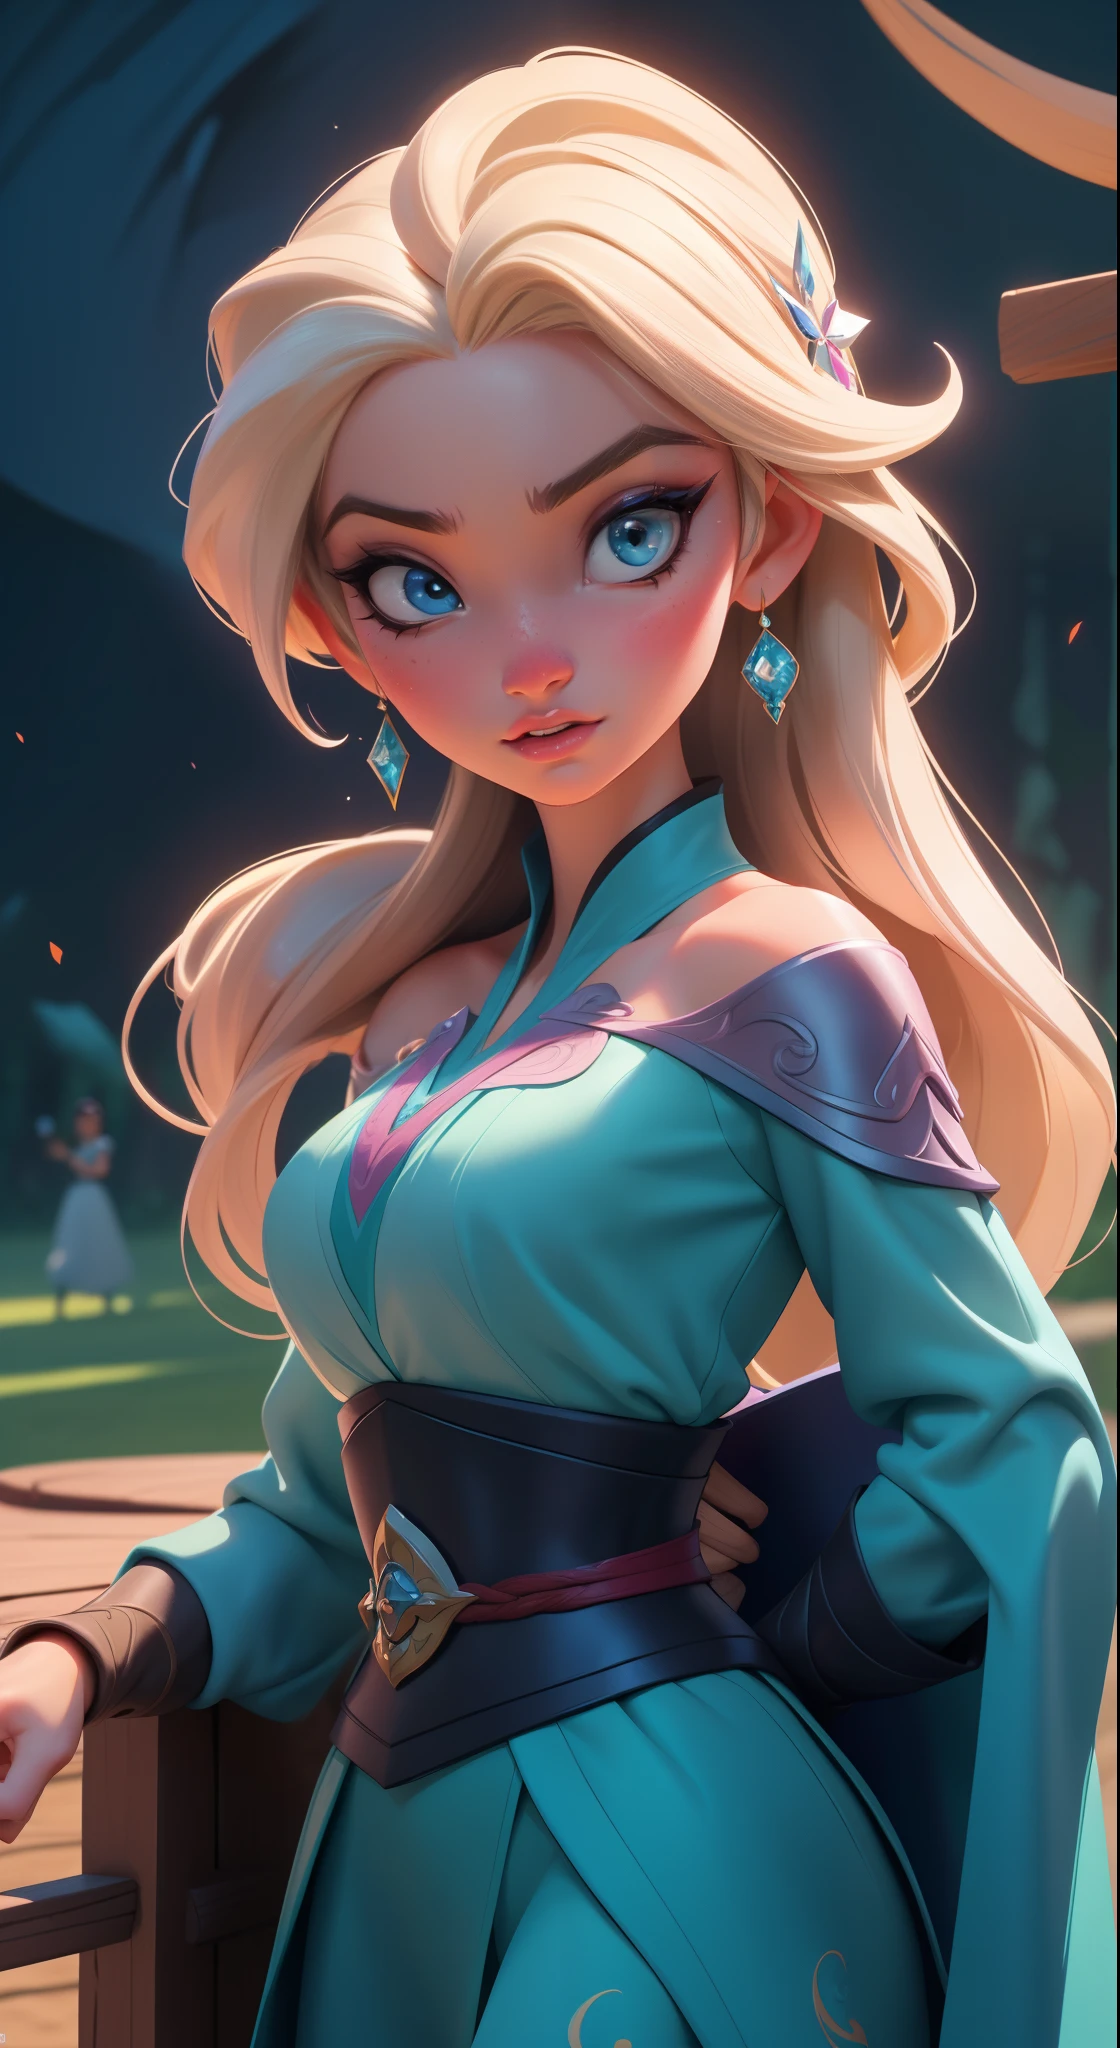 Elsa-Mulan Fusion, Merging models, melting, Mulan&#39;s clothes, 1girl, Beautiful, character, Woman, female, (master part:1.2), (best qualityer:1.2), (standing alone:1.2), ((struggling pose)), ((field of battle)), cinemactic, perfects eyes, perfect  skin, perfect lighting, sorrido, Lumiere, Farbe, texturized skin, detail, Beauthfull, wonder wonder wonder wonder wonder wonder wonder wonder wonder wonder wonder wonder wonder wonder wonder wonder wonder wonder wonder wonder wonder wonder wonder wonder wonder wonder wonder wonder wonder wonder wonder wonder, ultra detali, face perfect